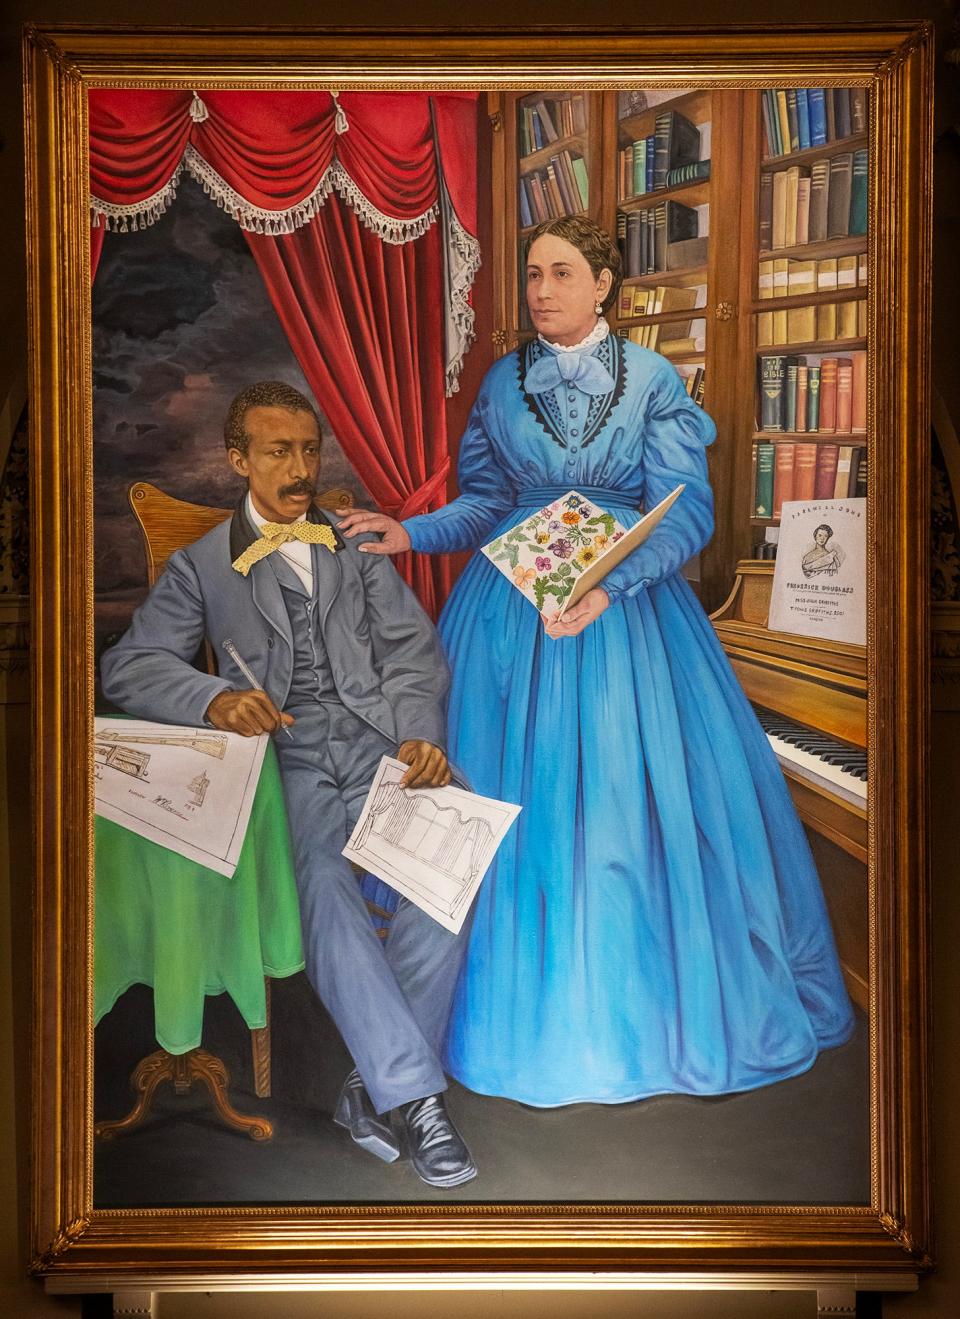 The new portrait of Worcester business owners and abolitionists William and Martha Brown, by artist Brenda Zlamany.